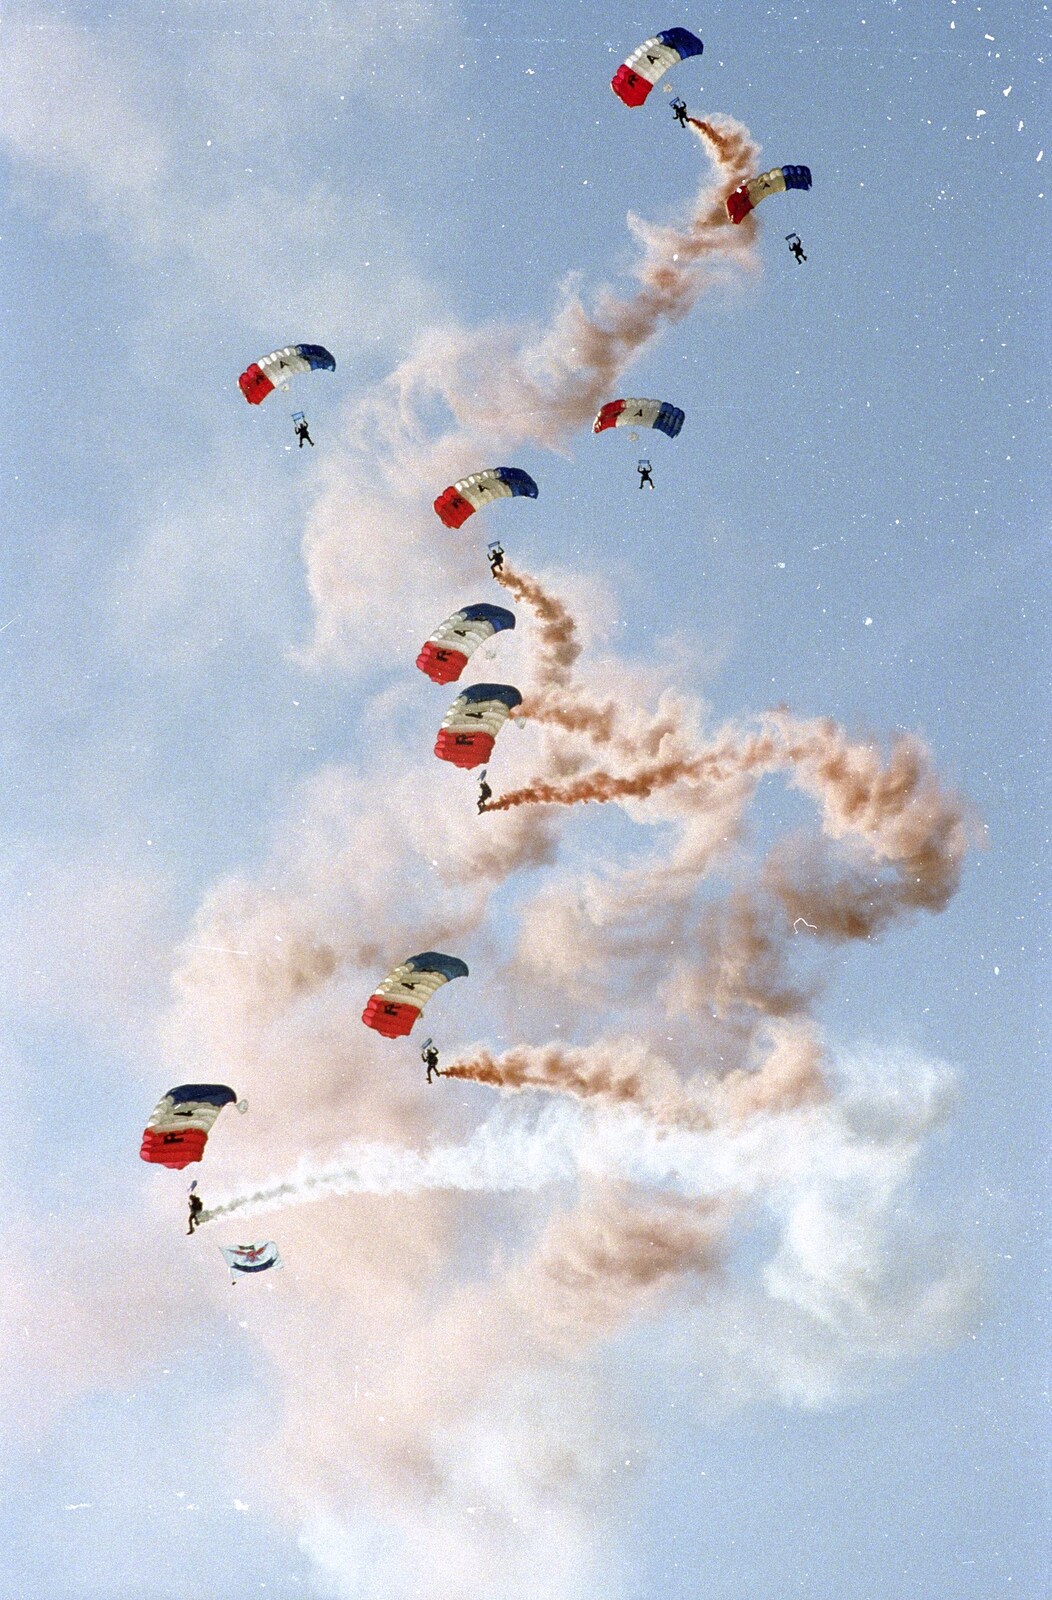 Massed parachute drop from The Mildenhall Air Fete, Mildenhall, Suffolk - 29th May 1994